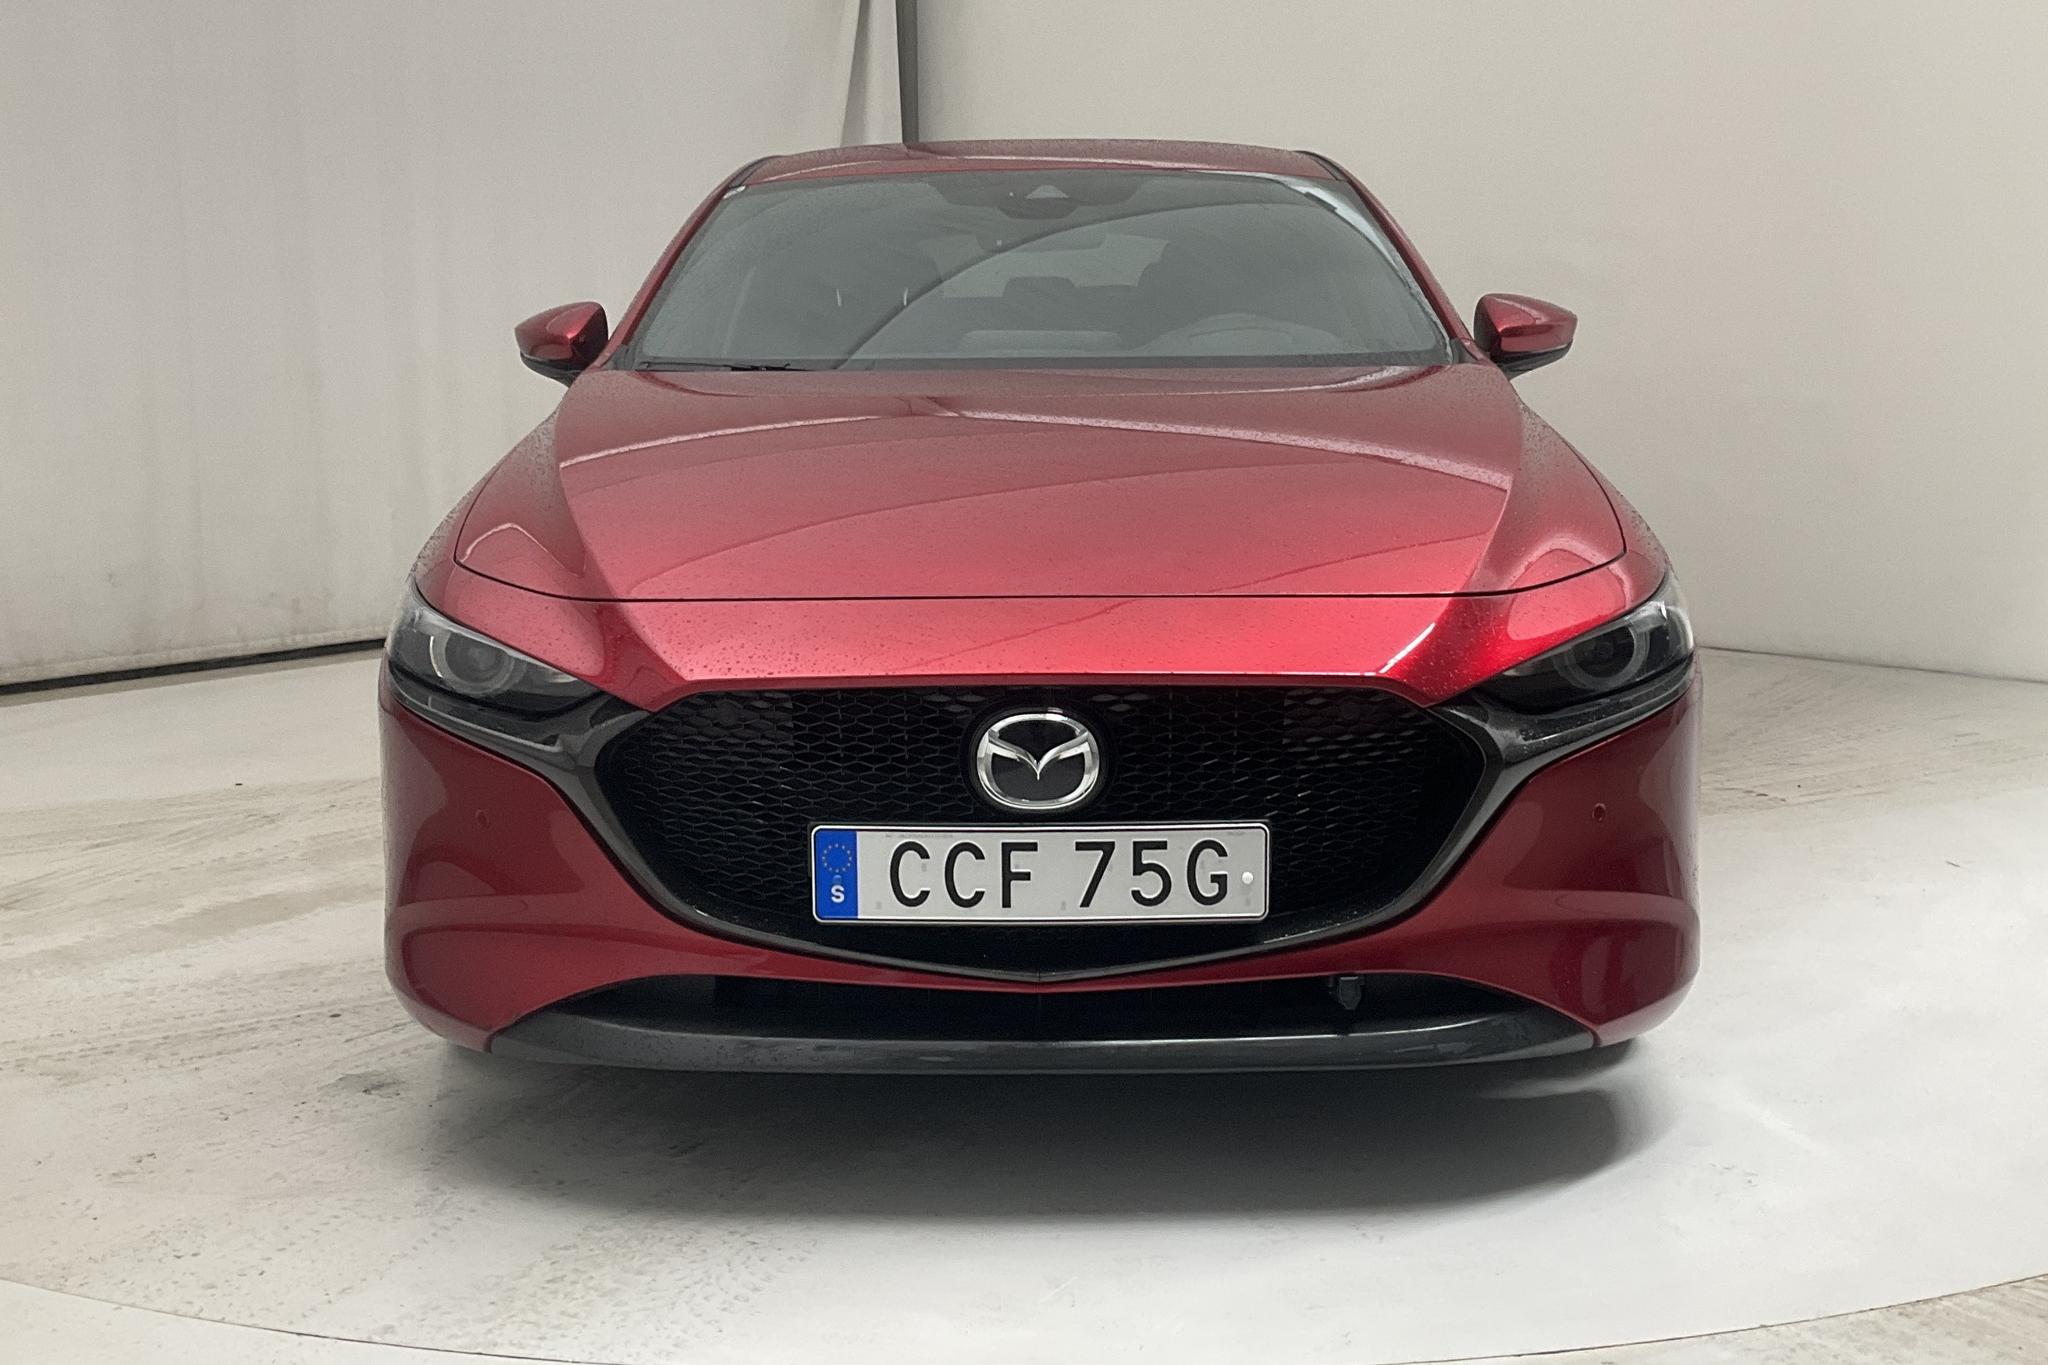 Mazda 3 2.0 5dr (122hk) - 23 580 km - Automatic - red - 2019